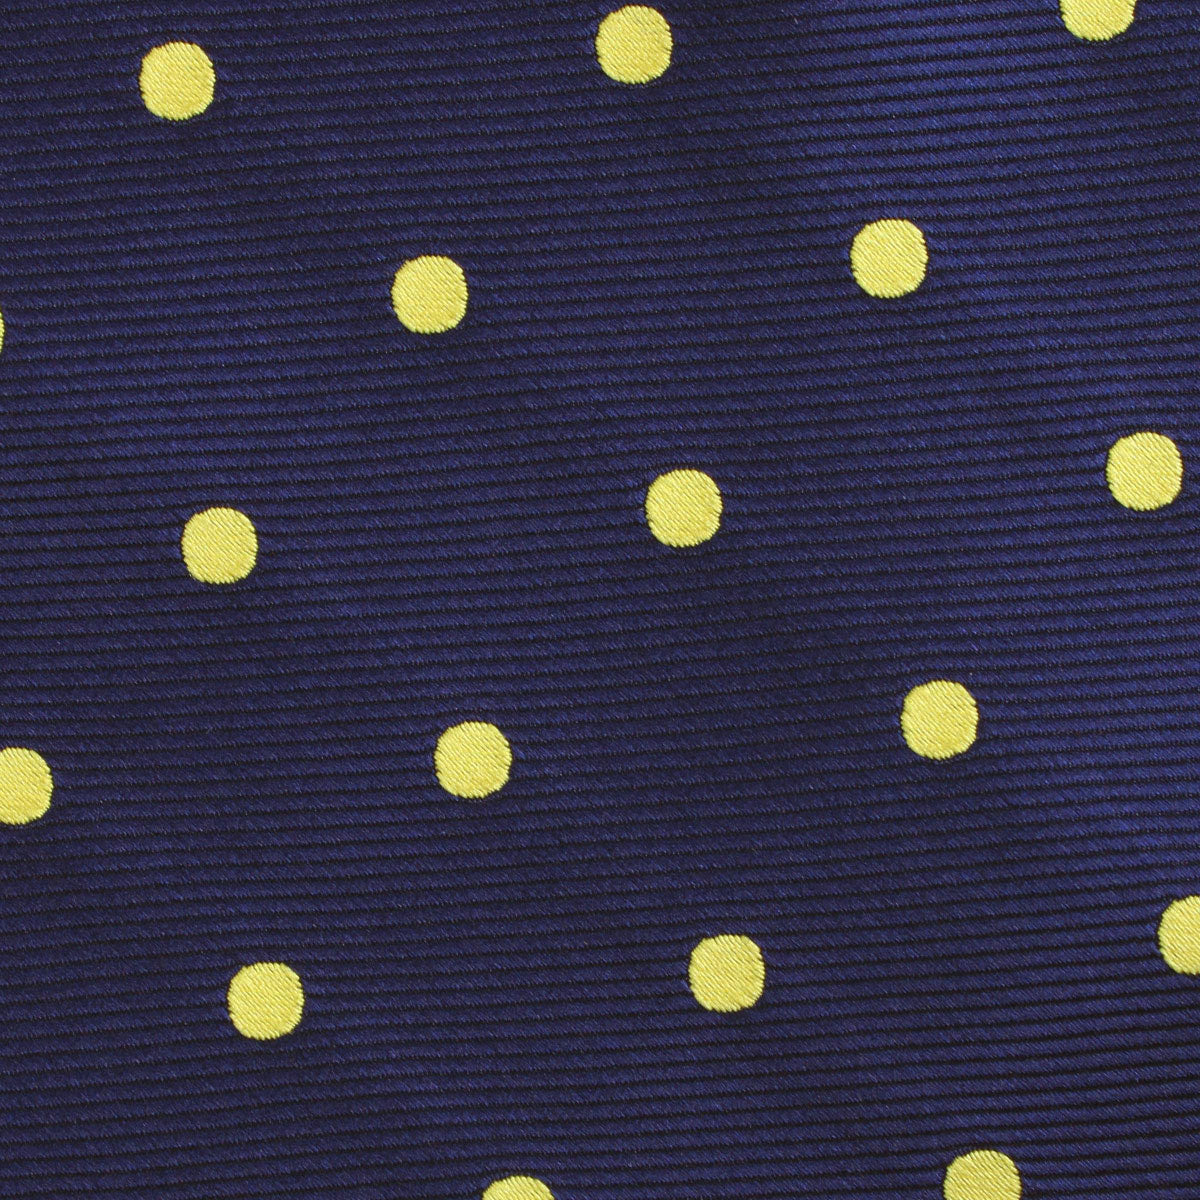 Navy on Large Yellow Dots Fabric Pocket Square